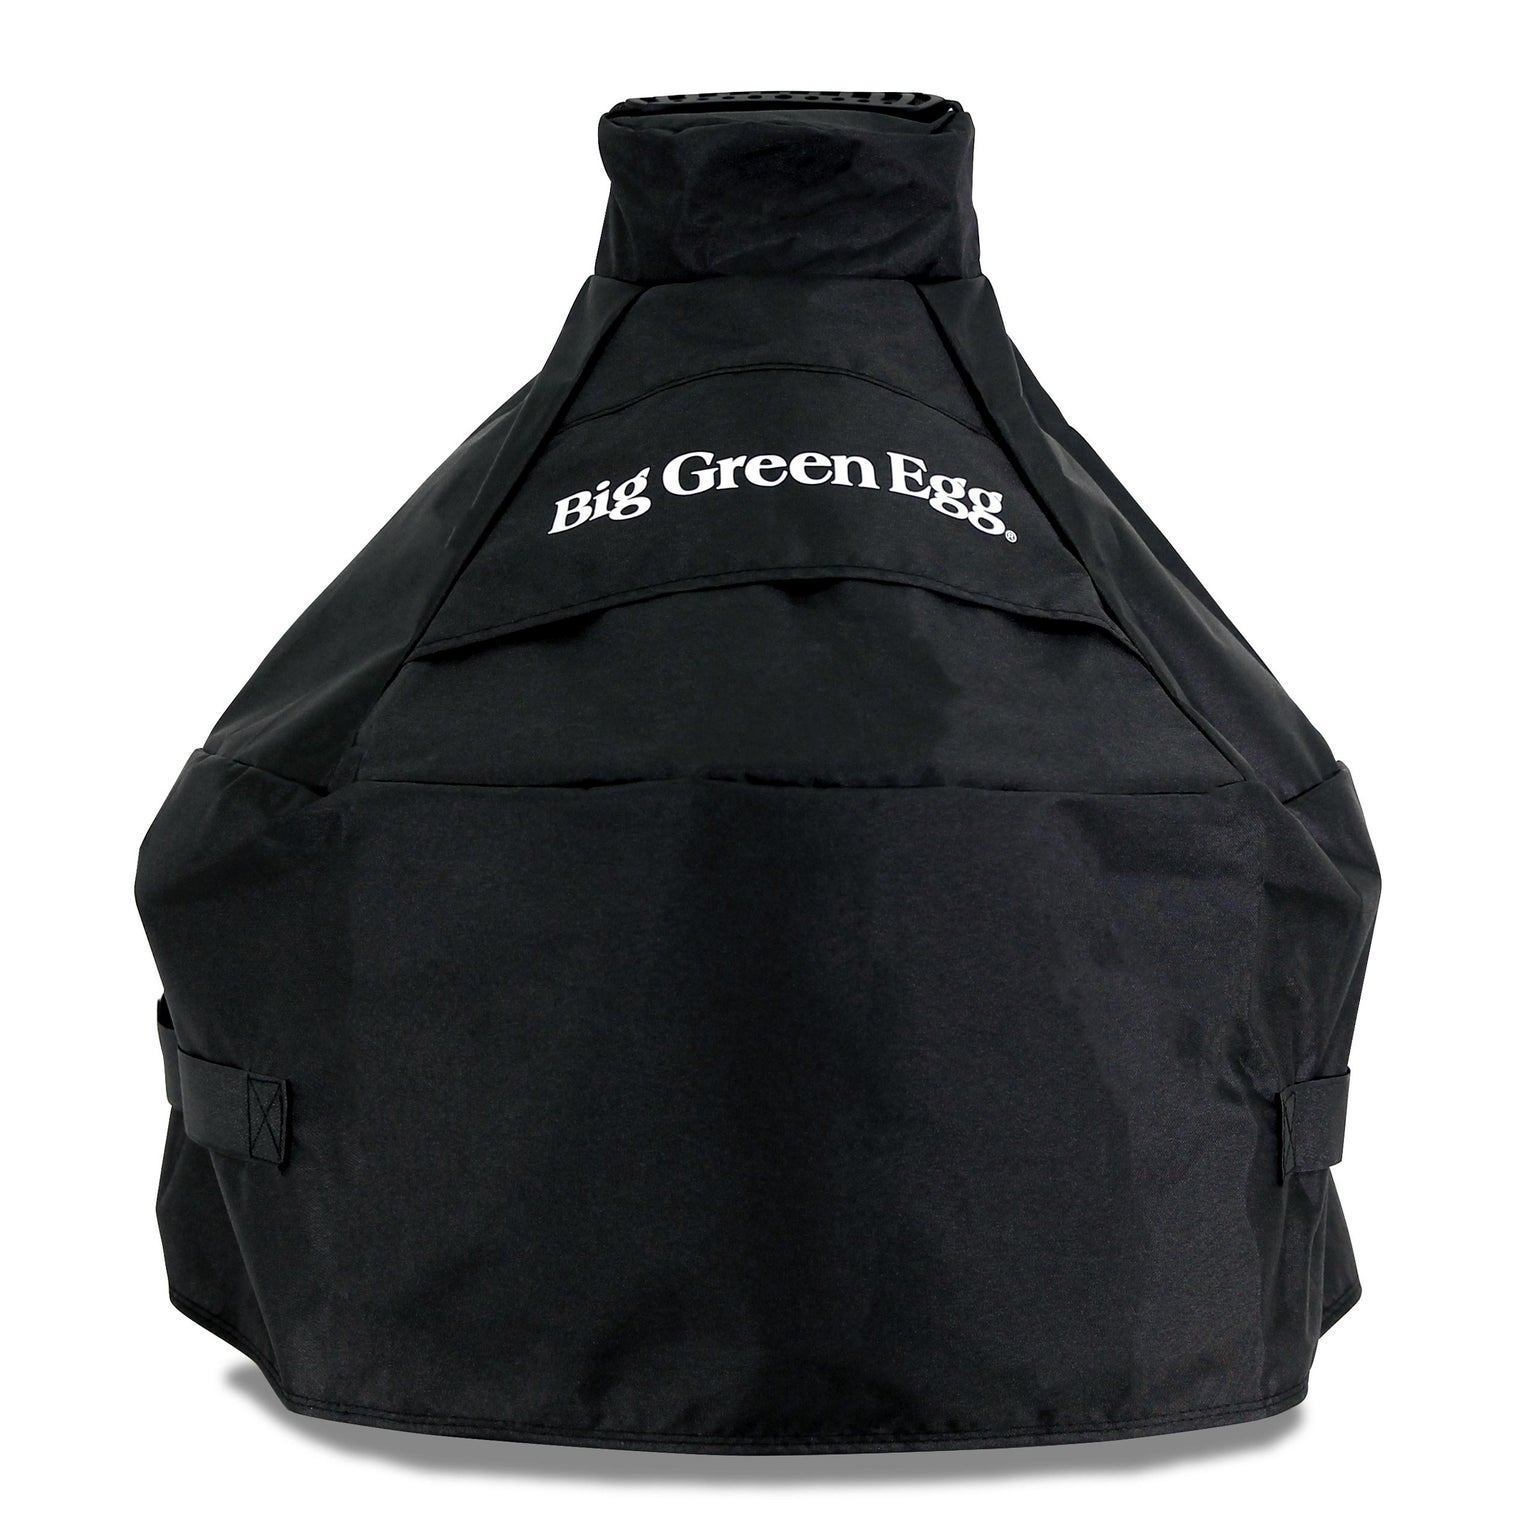 Cover Type G - Universal-Fit for Big Green Egg